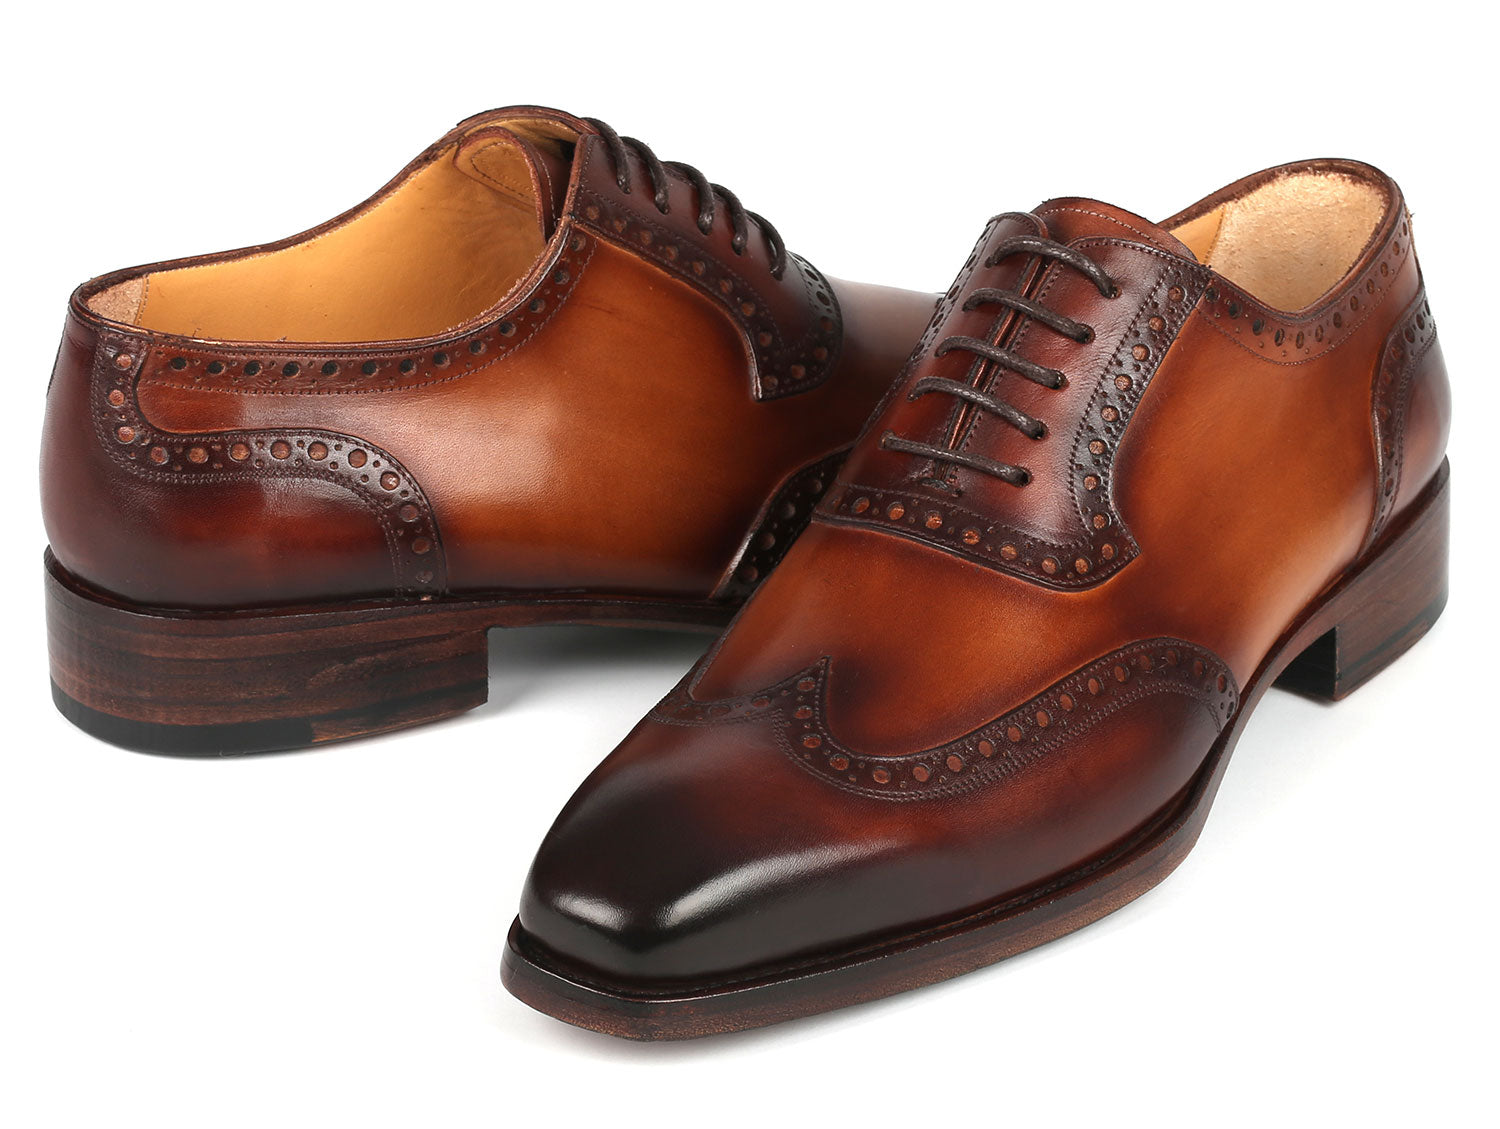 Paul Parkman Goodyear Welted Wingtip Oxfords Brown - 6819-BRW